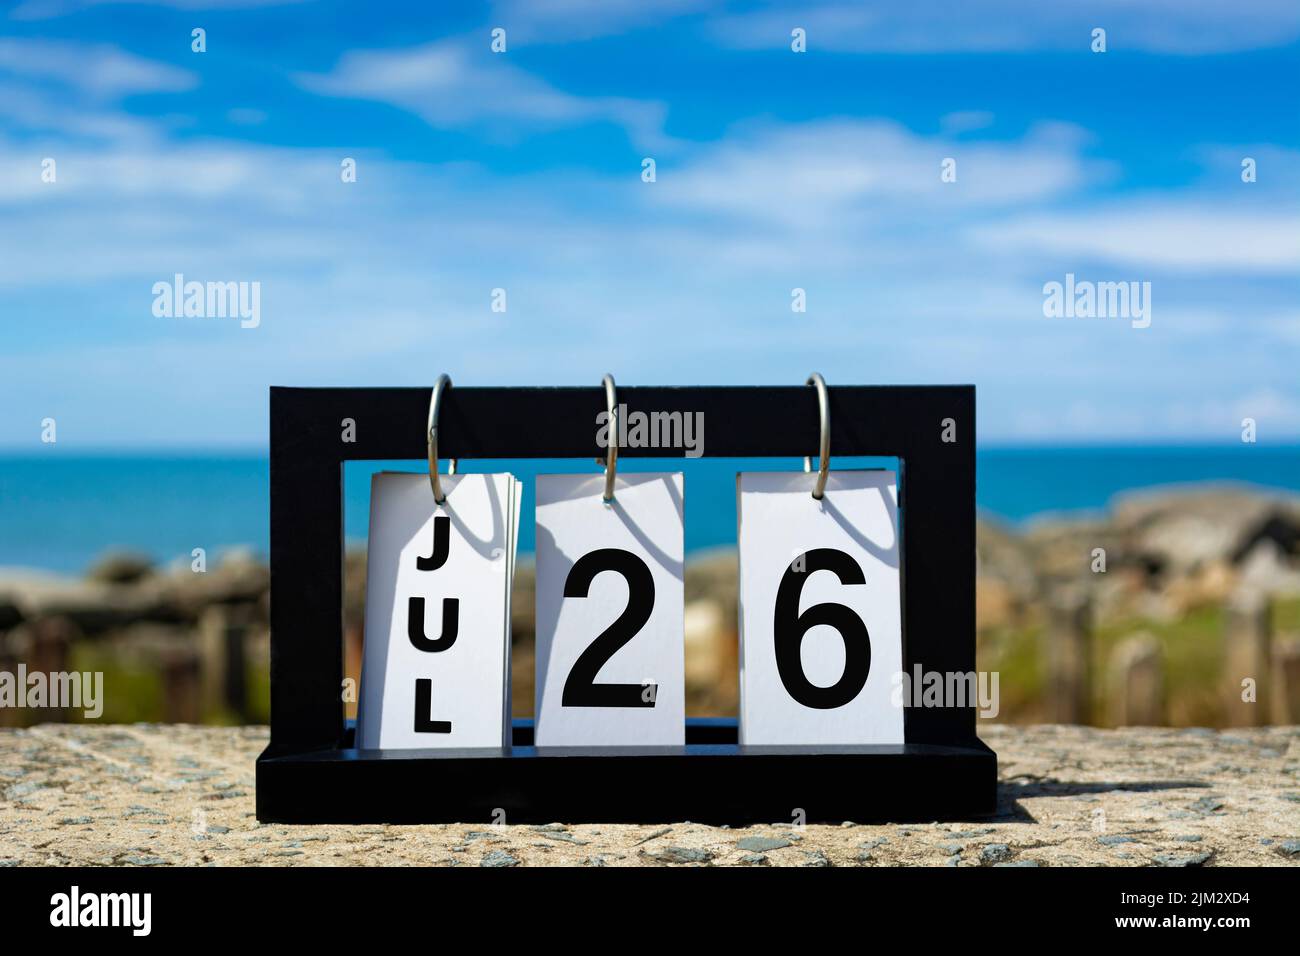 Jul 26 calendar date text on wooden frame with blurred background of ocean. Calendar date concept. Stock Photo